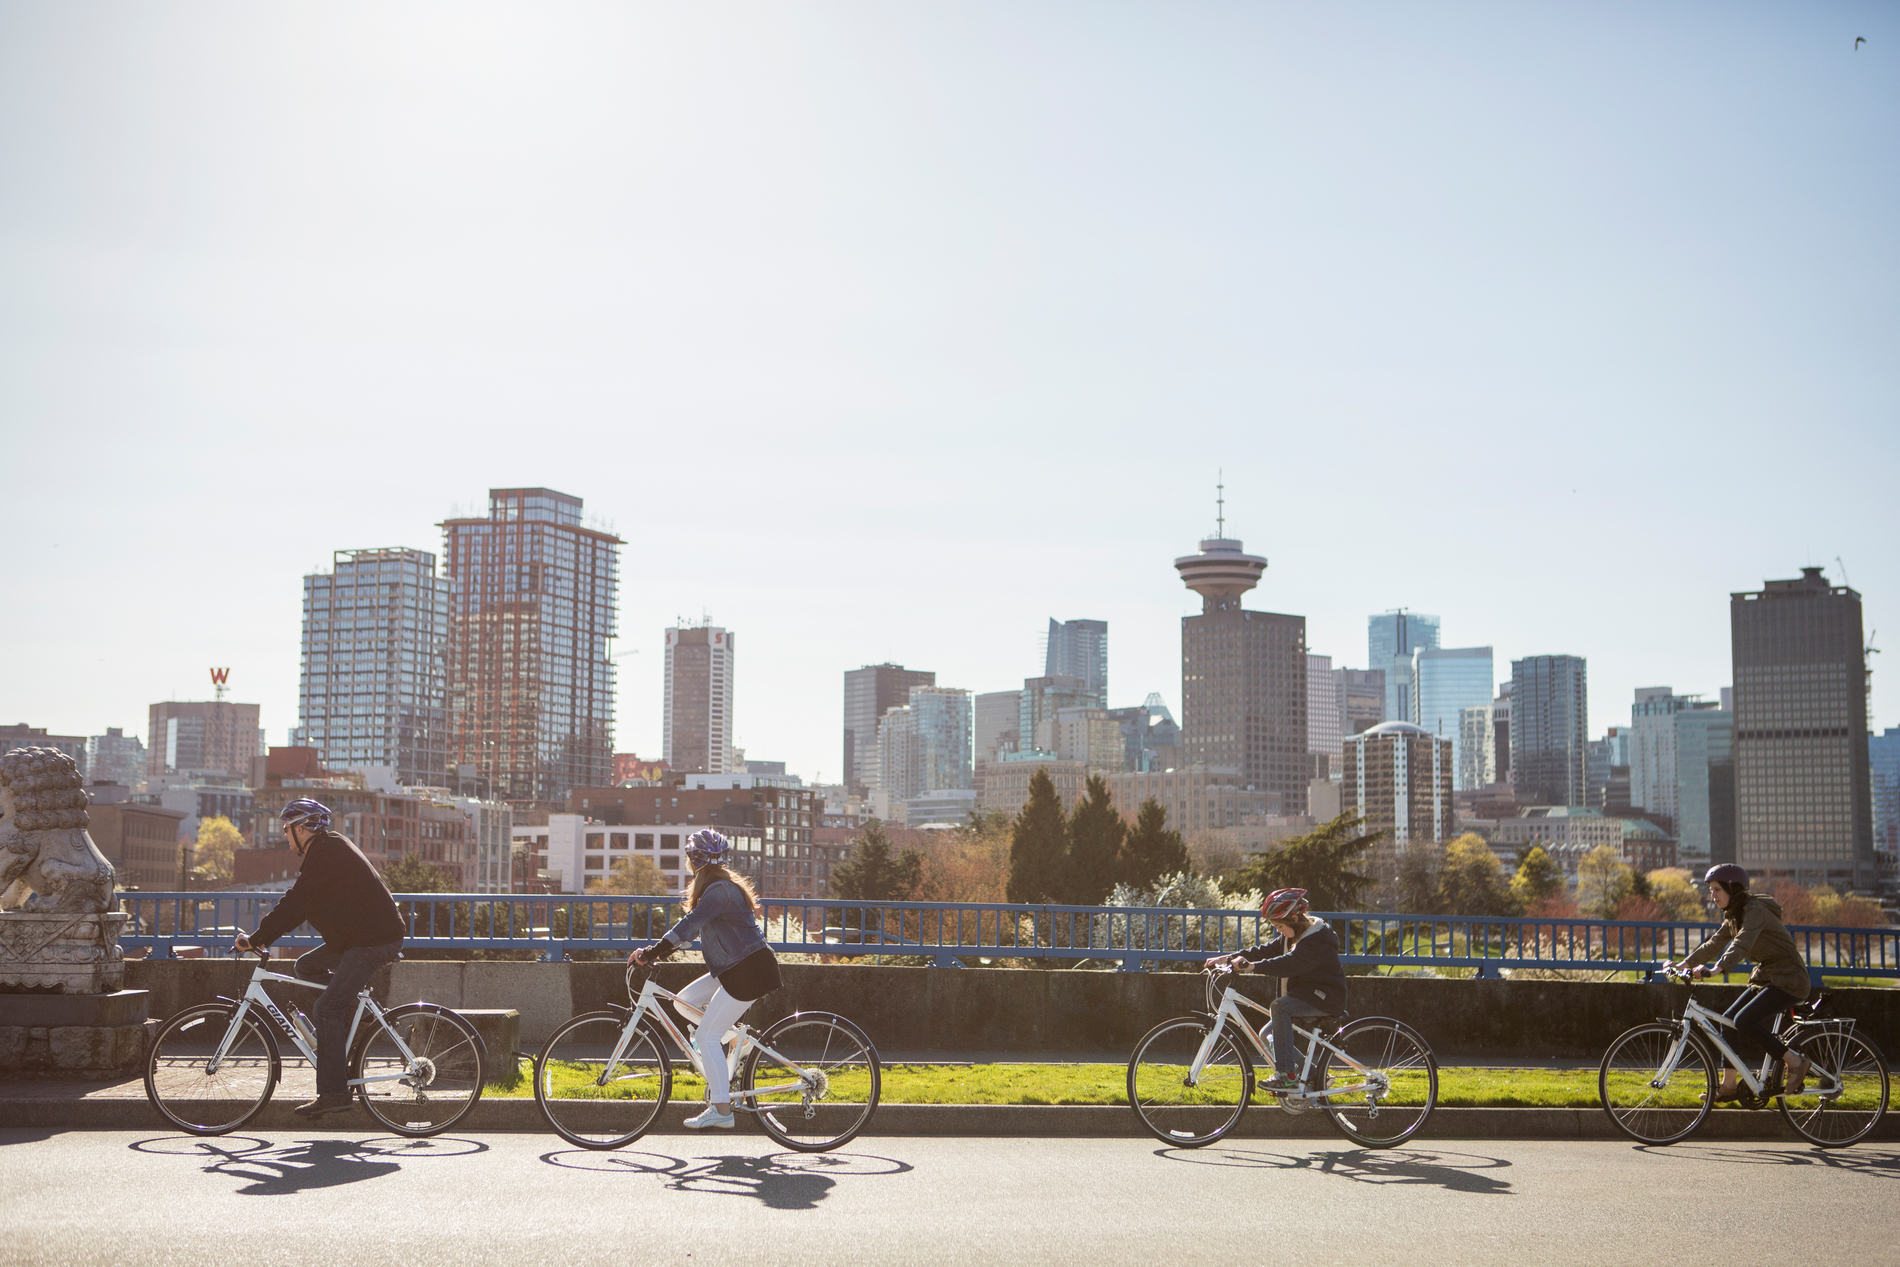 Cycle City Tours. Cycling along seawall. | Tourism Vancouver/Cycle City Tours